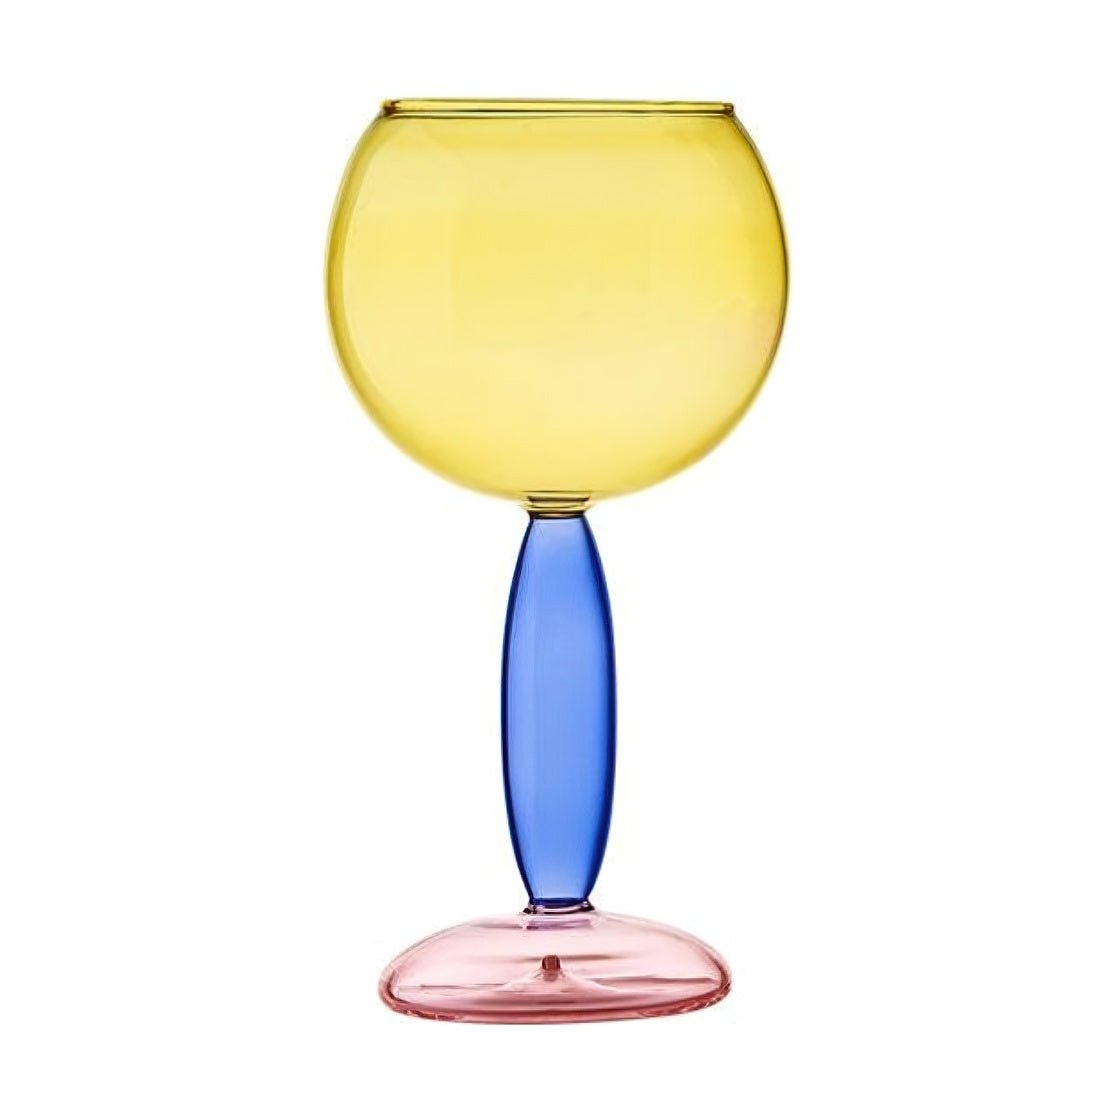 Yellow glass goblet with blue stem and pink bottom.